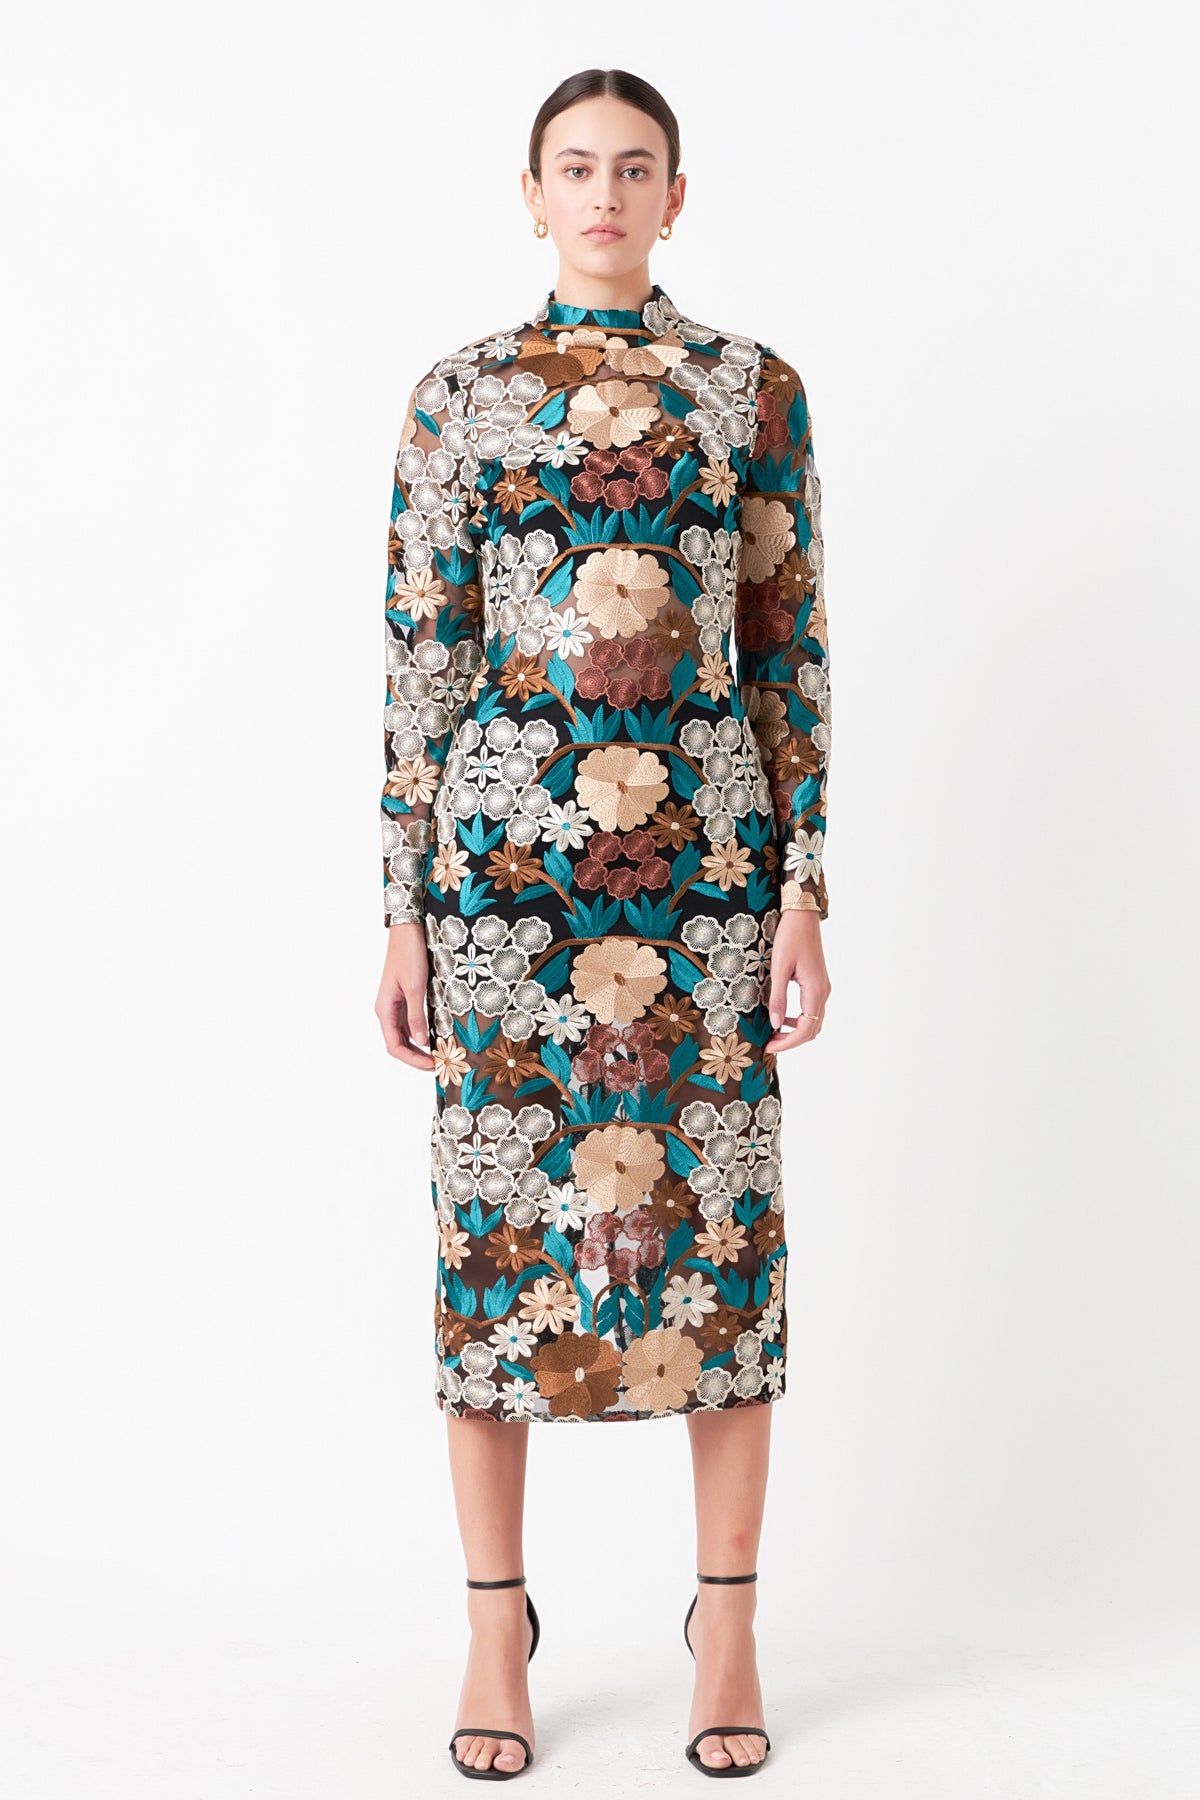 ENDLESS ROSE - Floral Embroidered Midi Dress - DRESSES available at Objectrare